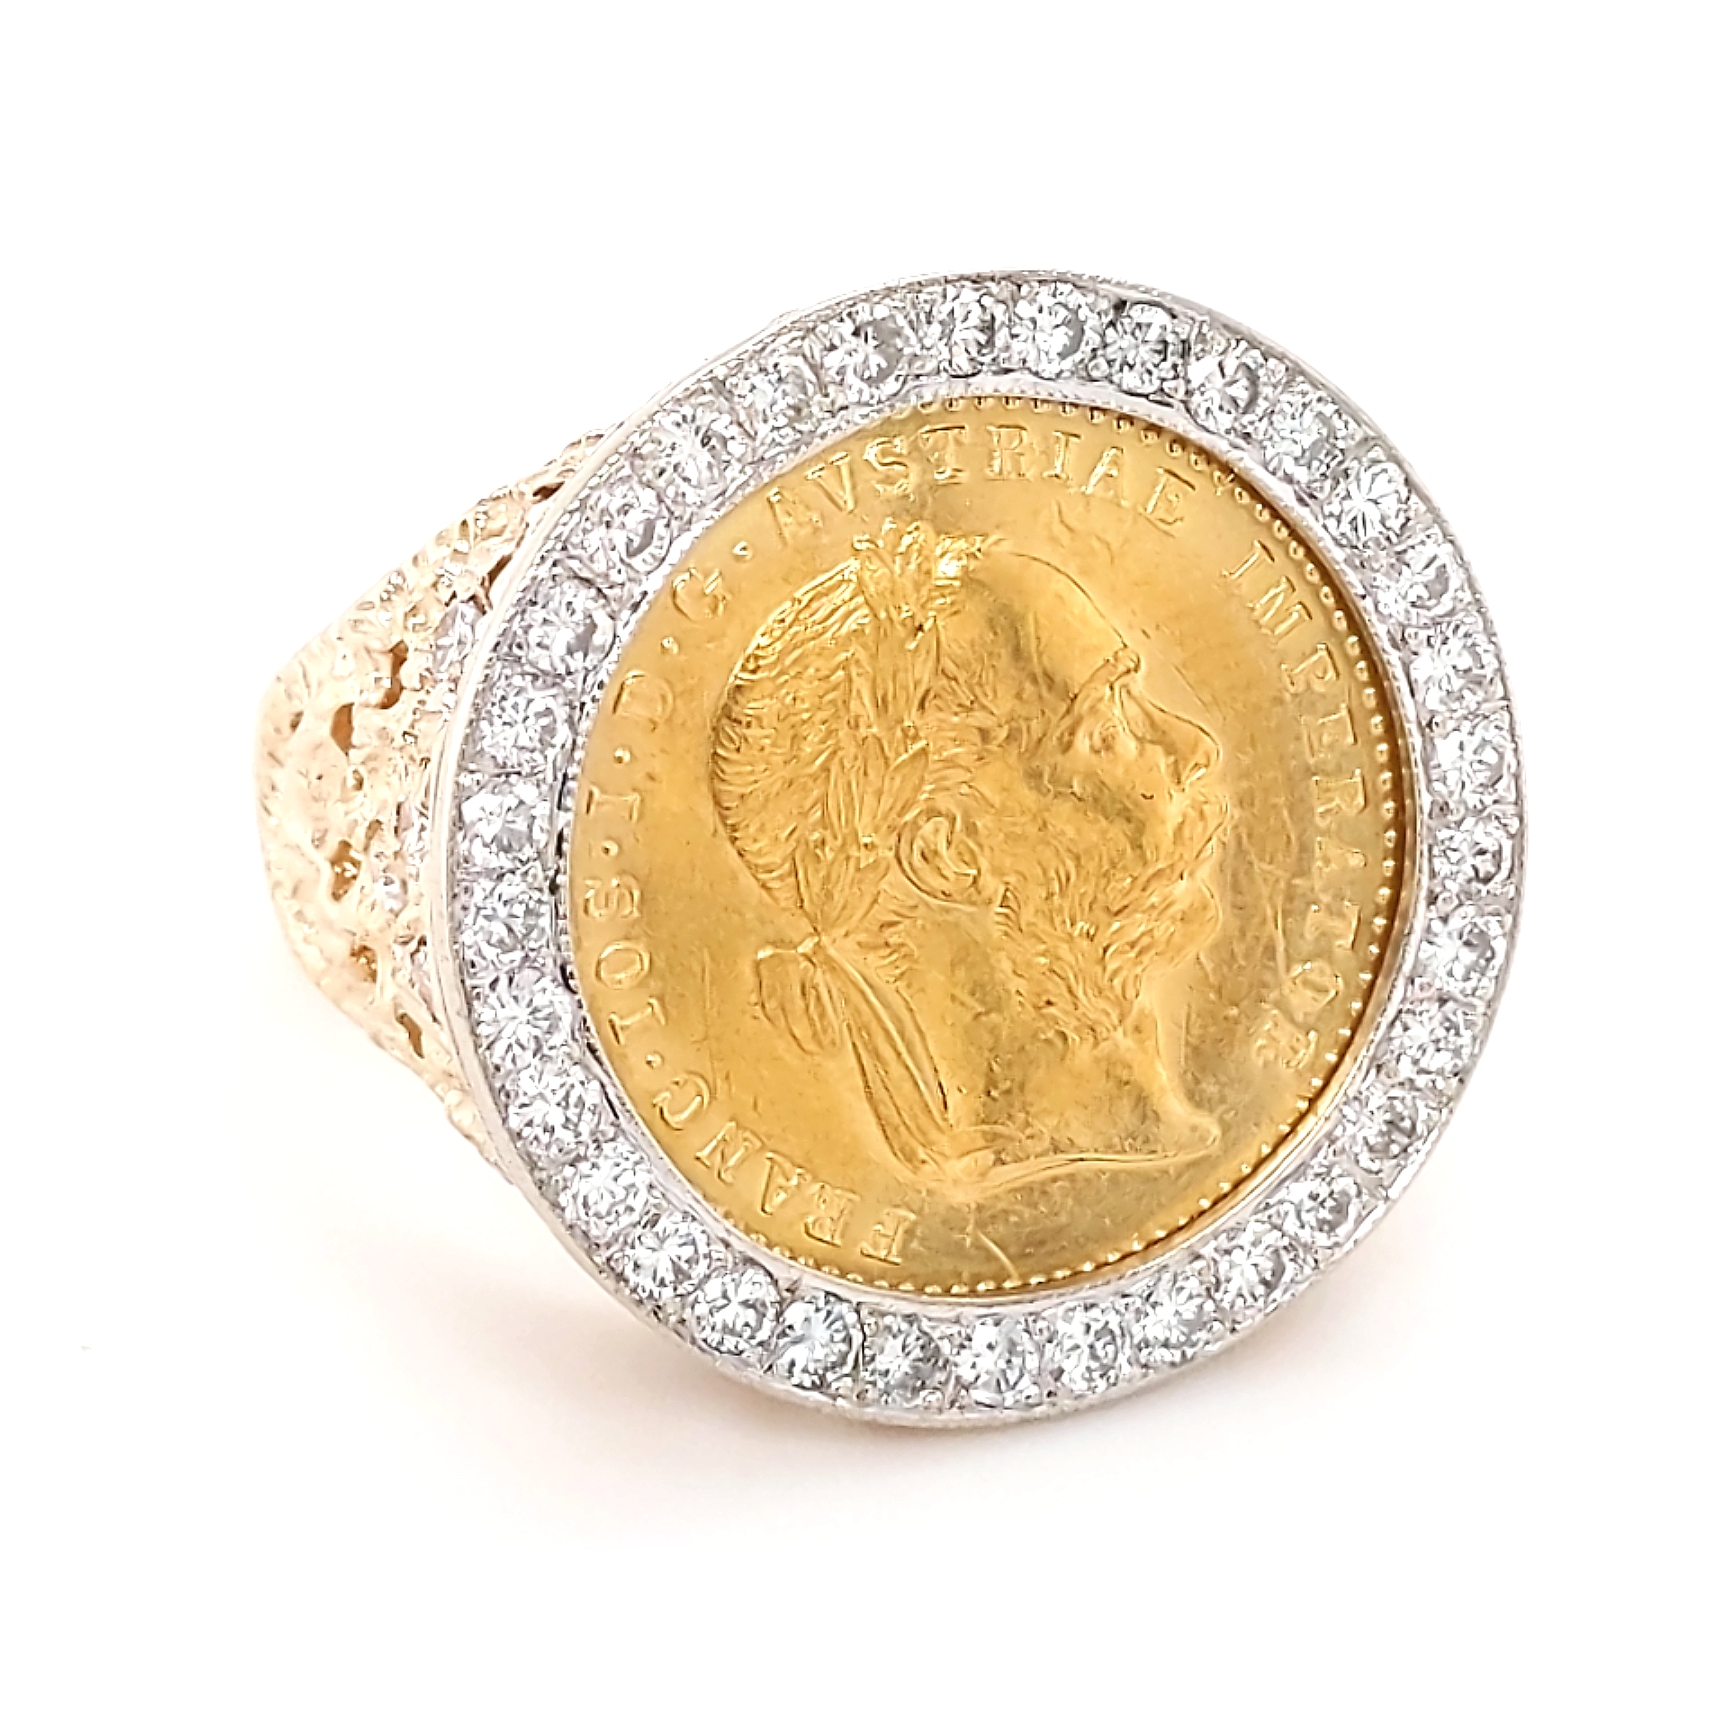 14K Yellow Gold 1.25ctw Diamond Coin Ring with Hungarian Gold coin 1915 - finger size 9.5